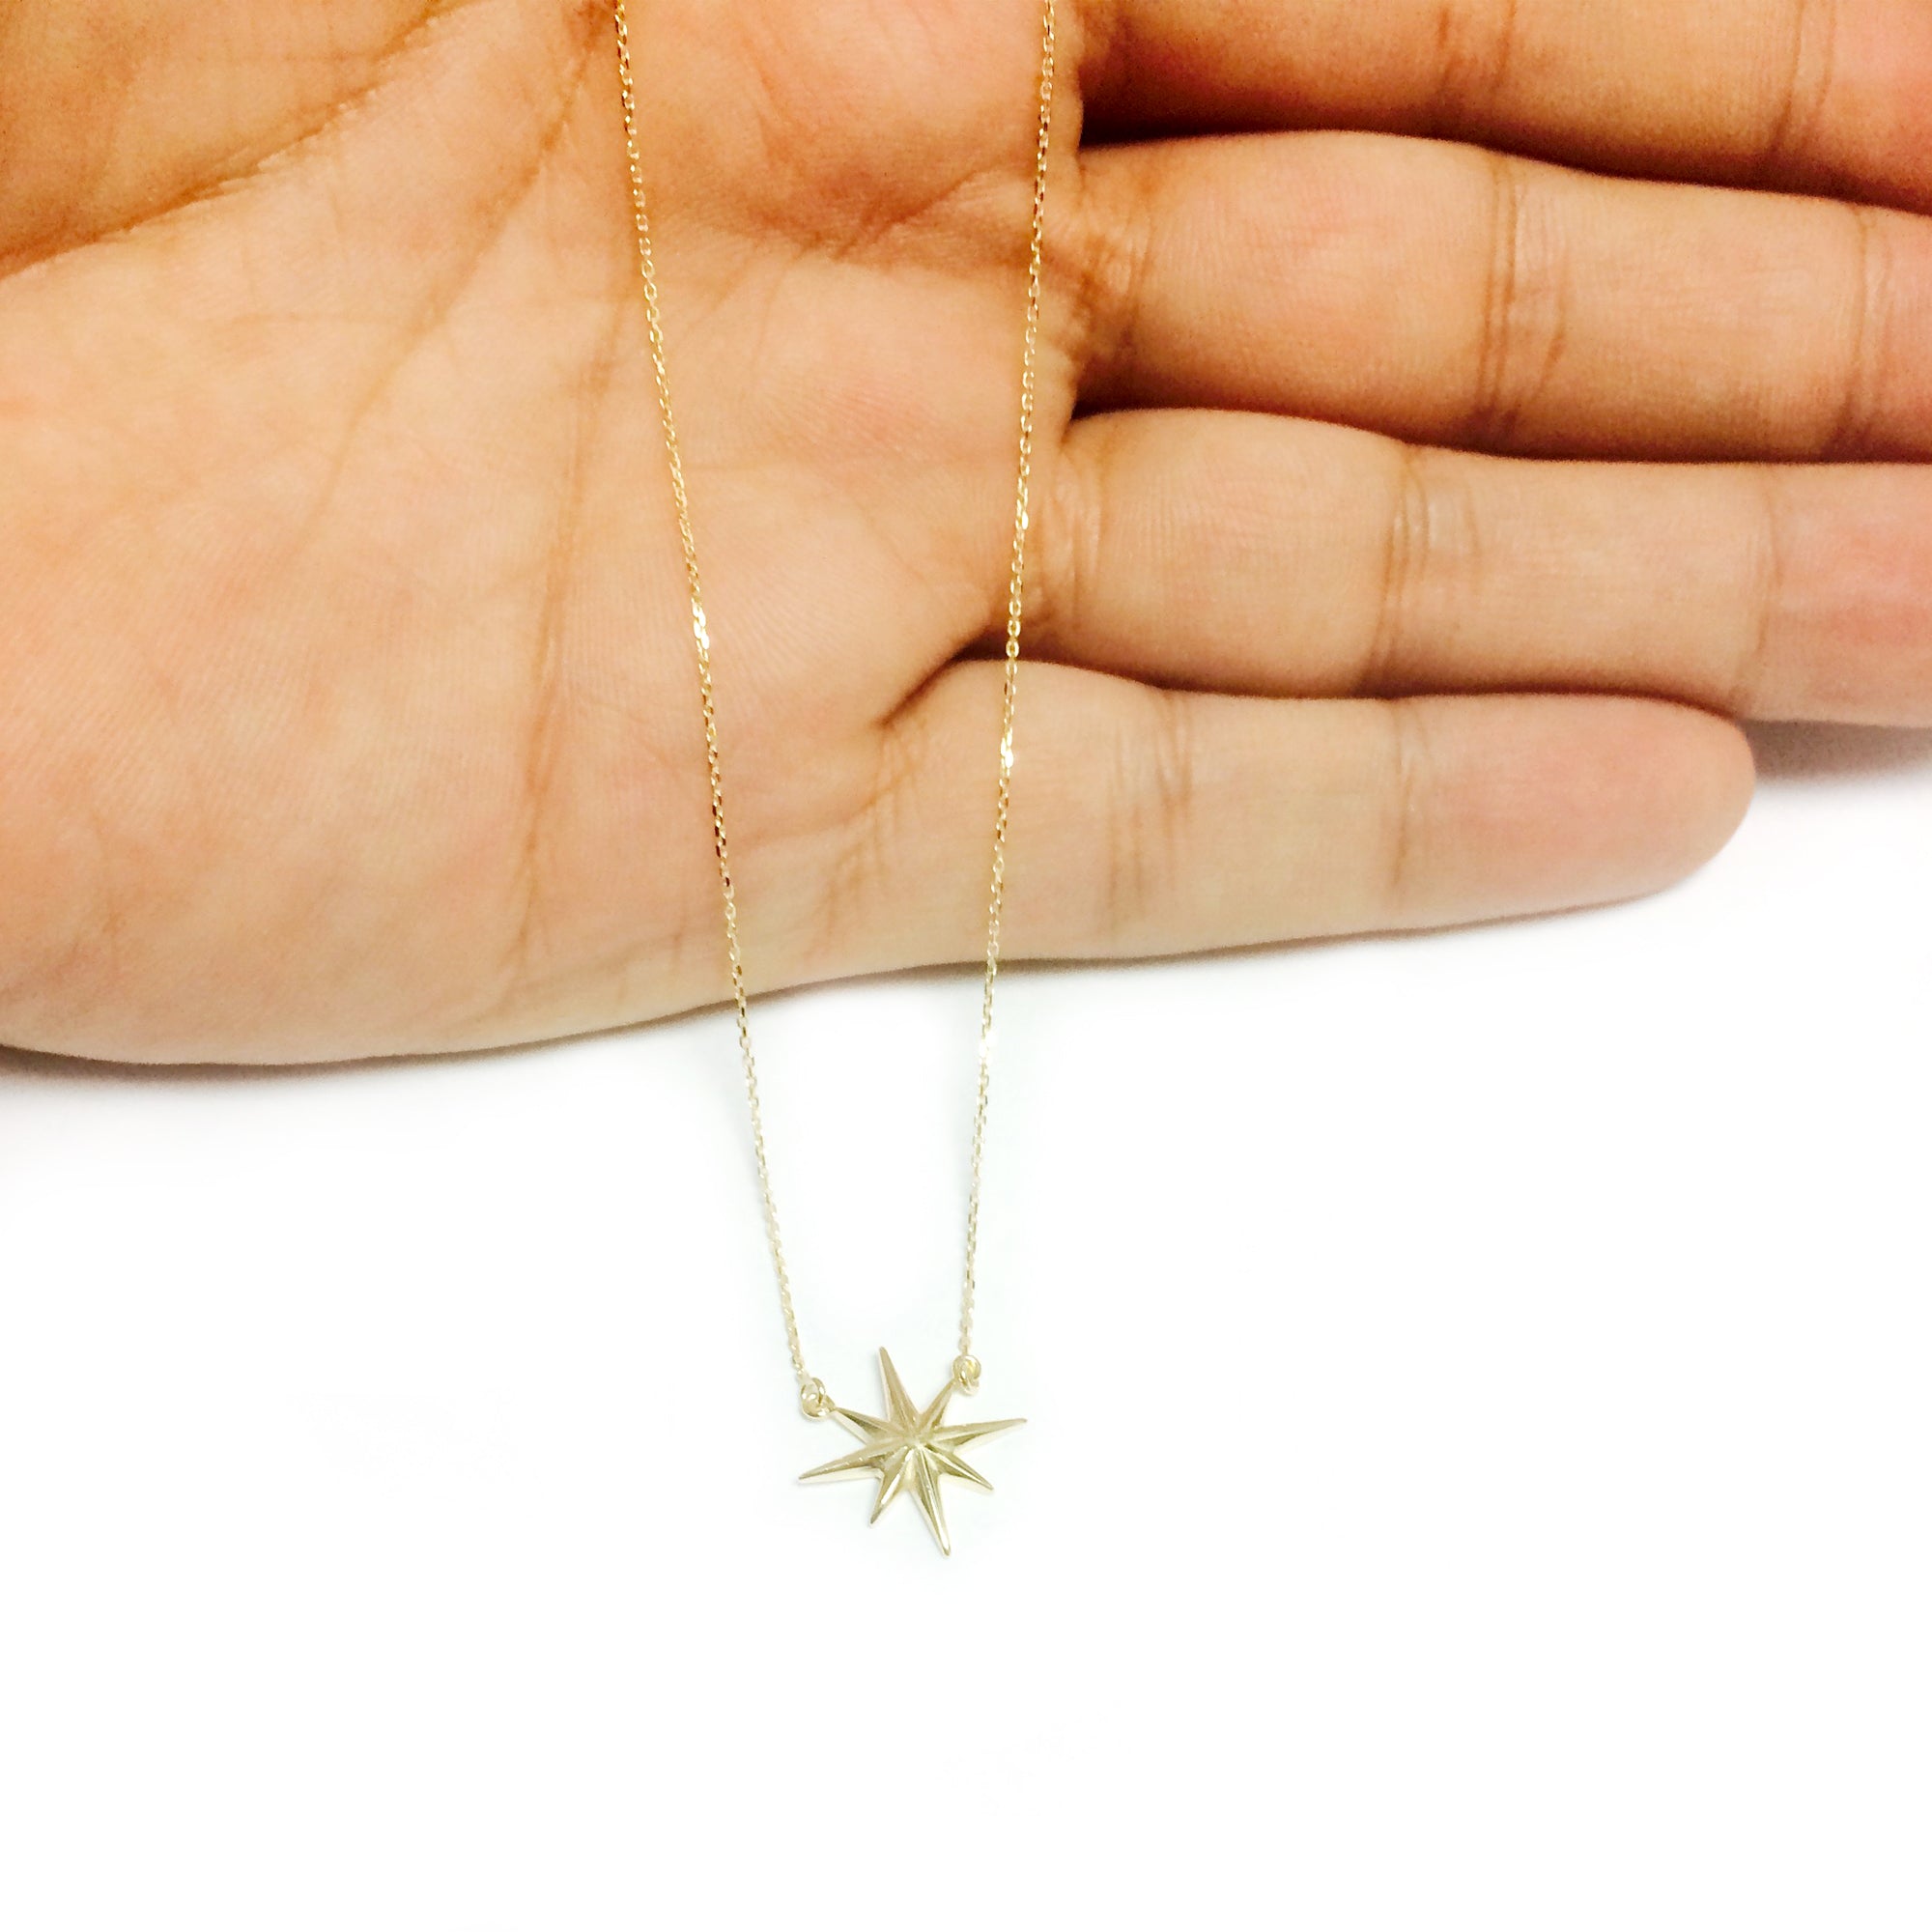 10K Yellow Gold North Star Pendant Necklace, 18"